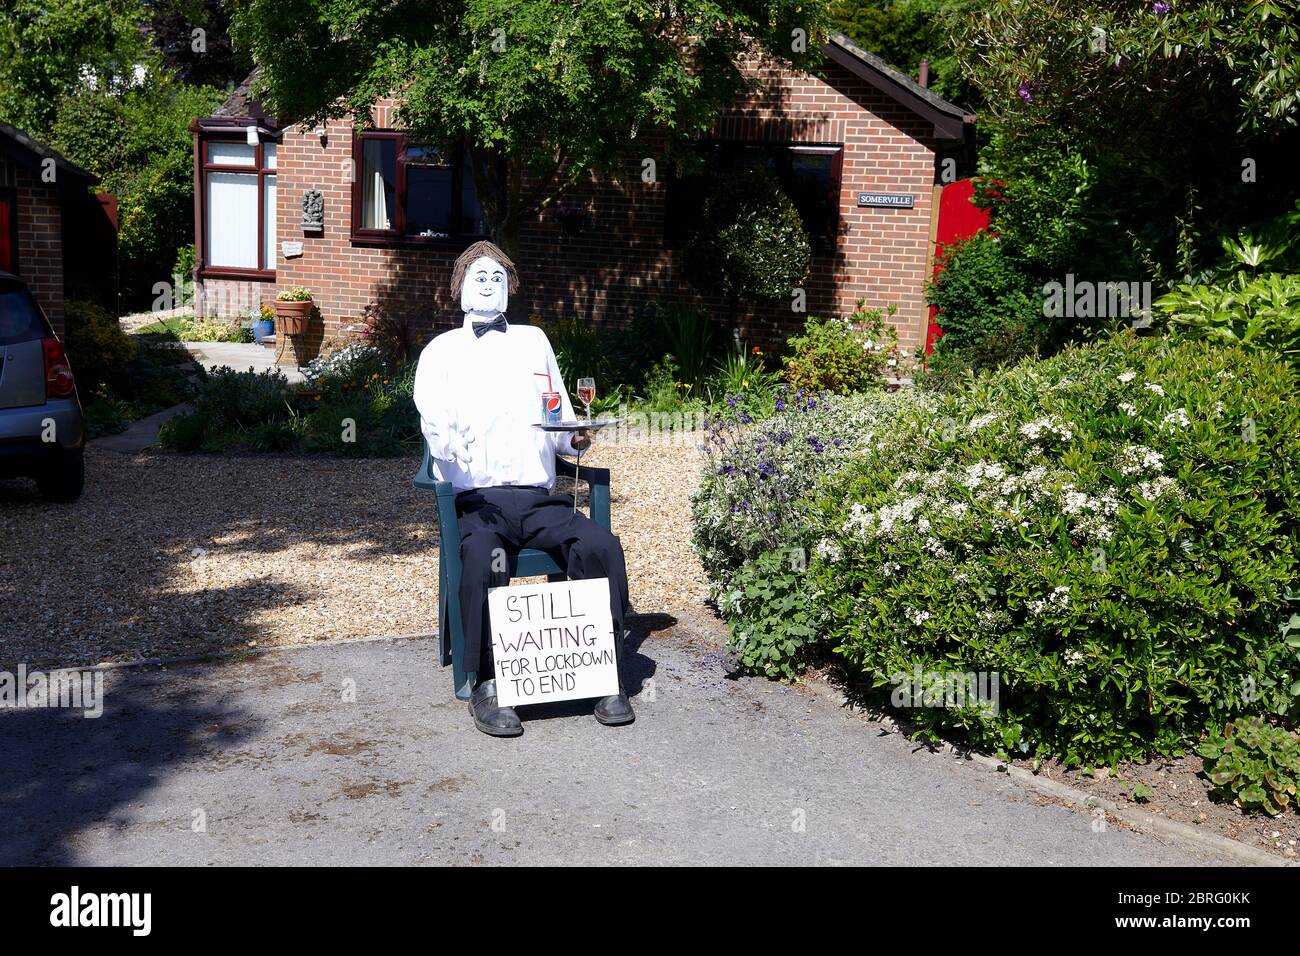 Sandleheath, UK. - May 20, 2020: A waiiter scarecrow outside a house. The Hampshire village of Sandleheath holds an annual scarecrow competition. Many entries this year adopt a coronavirus theme. Stock Photo